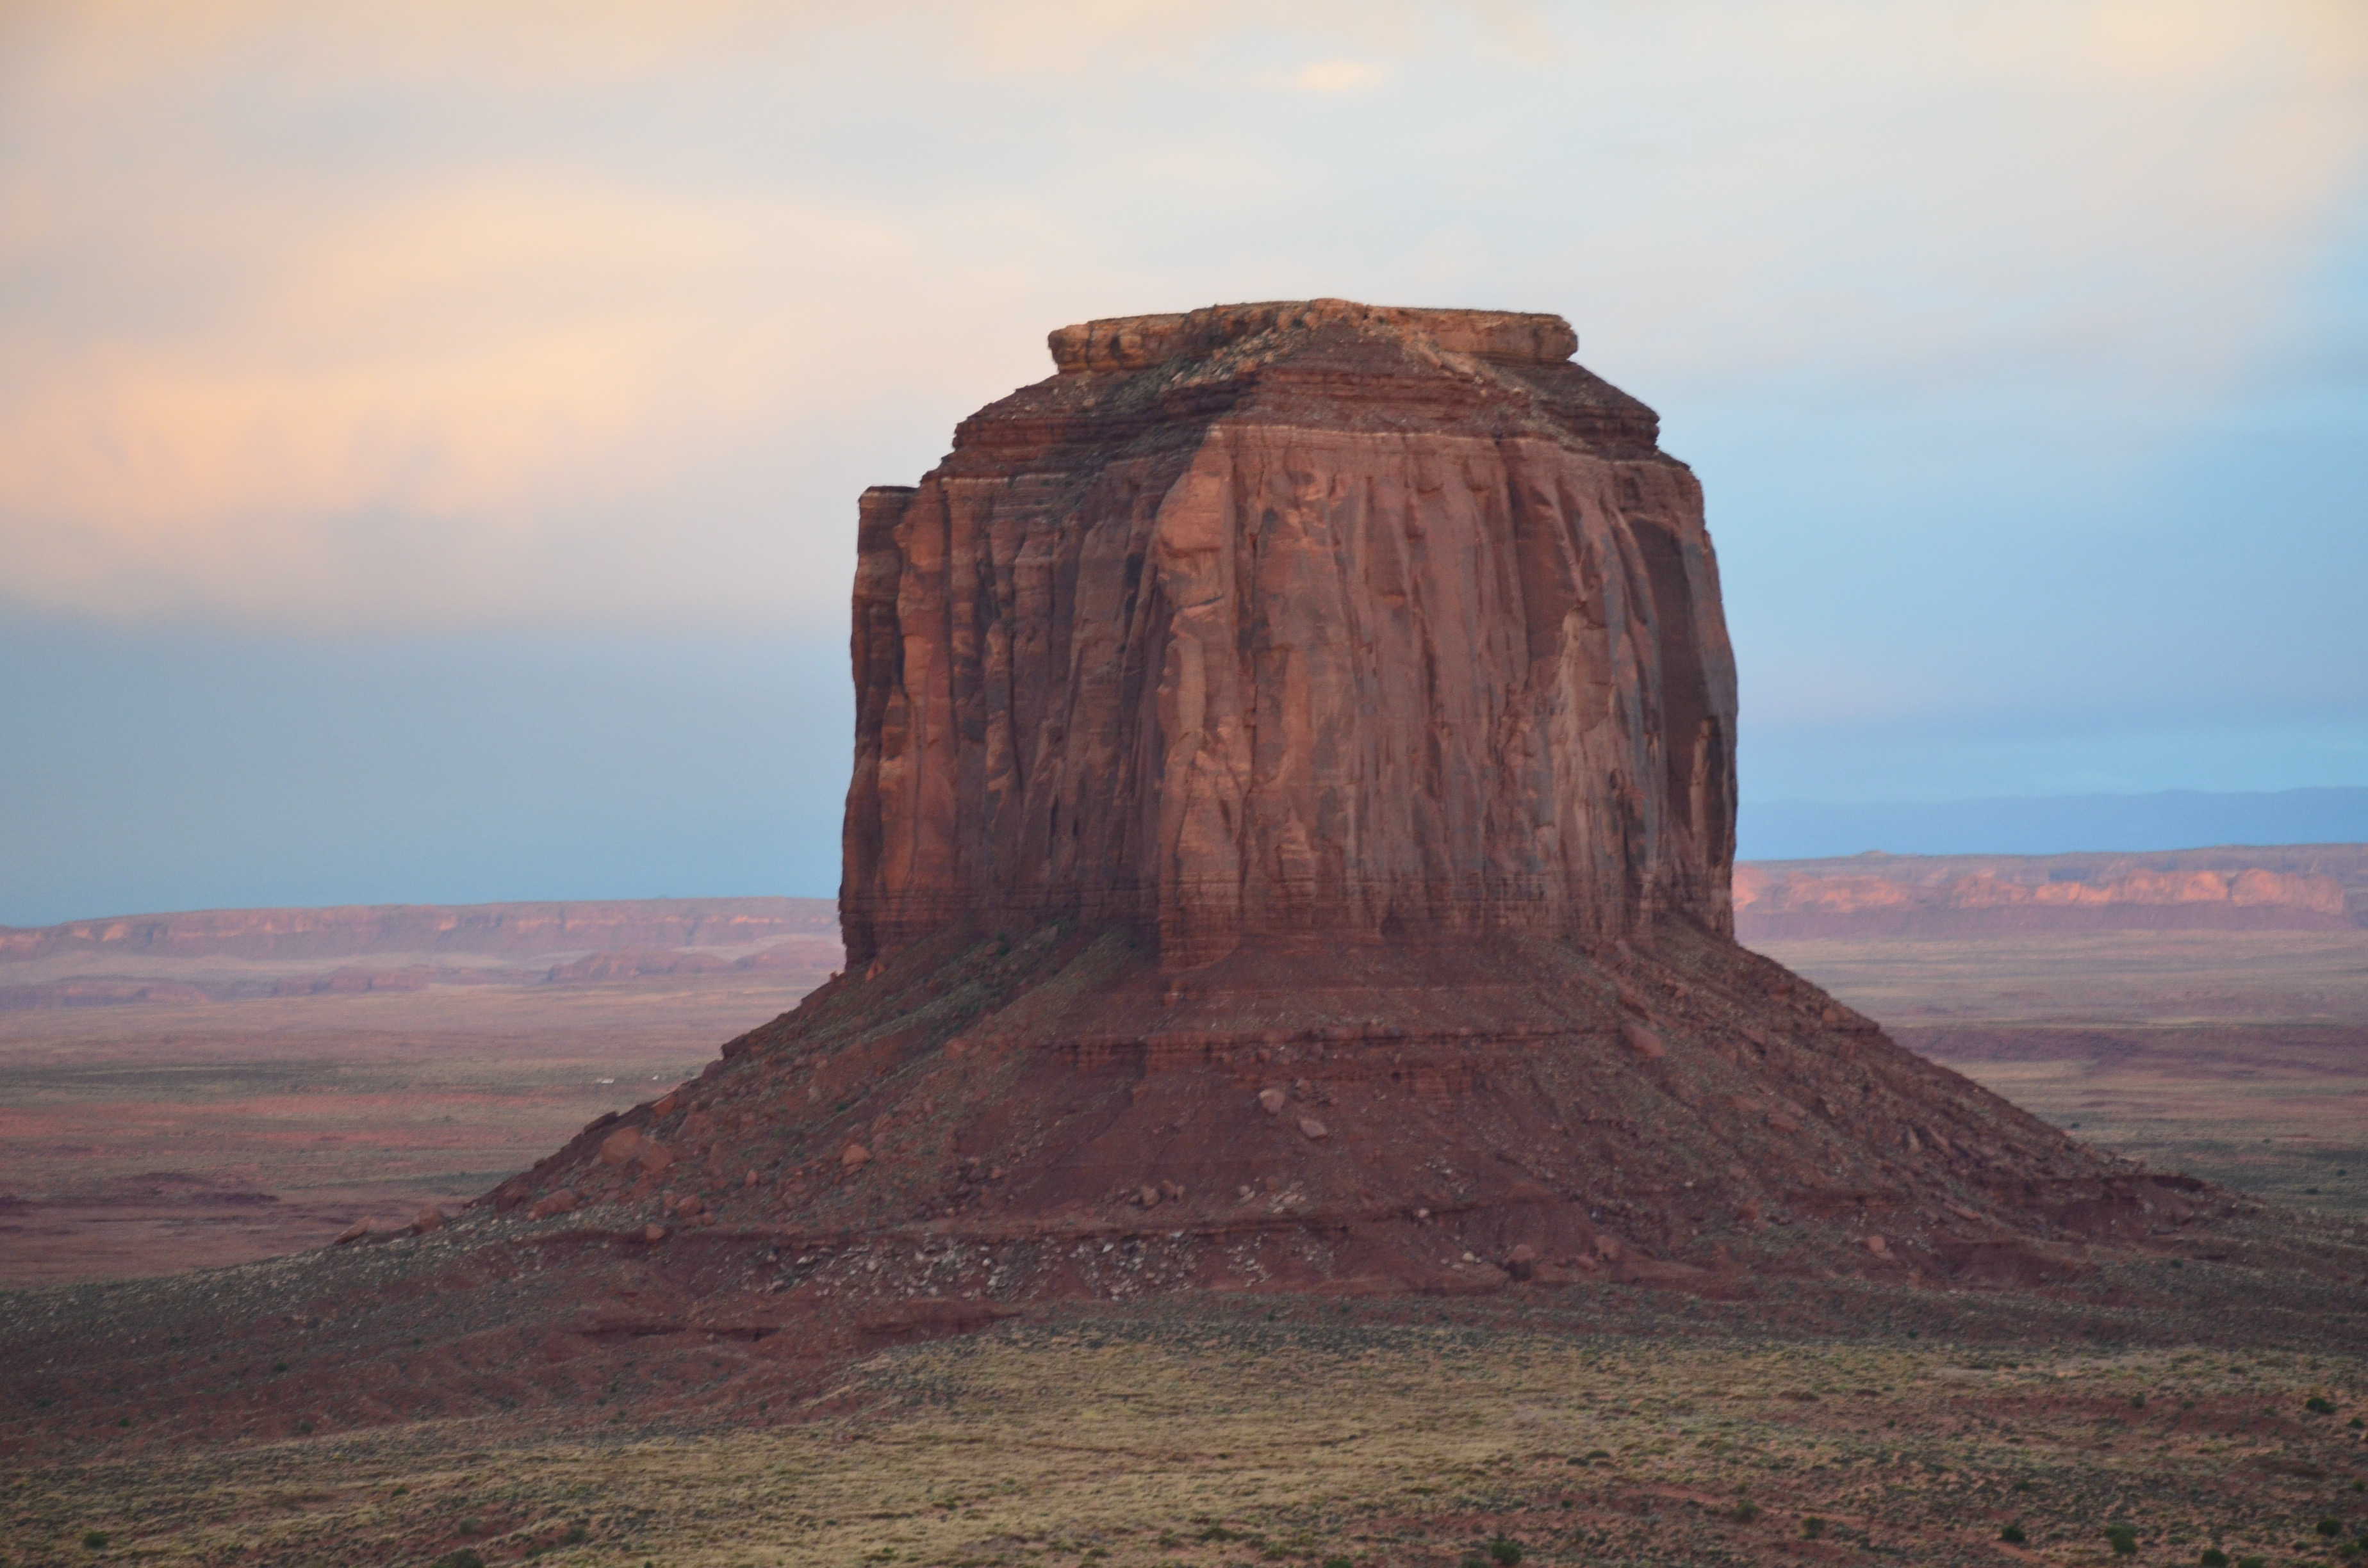 Merrick Butte at Monument Valley Tribal Park in Arizona